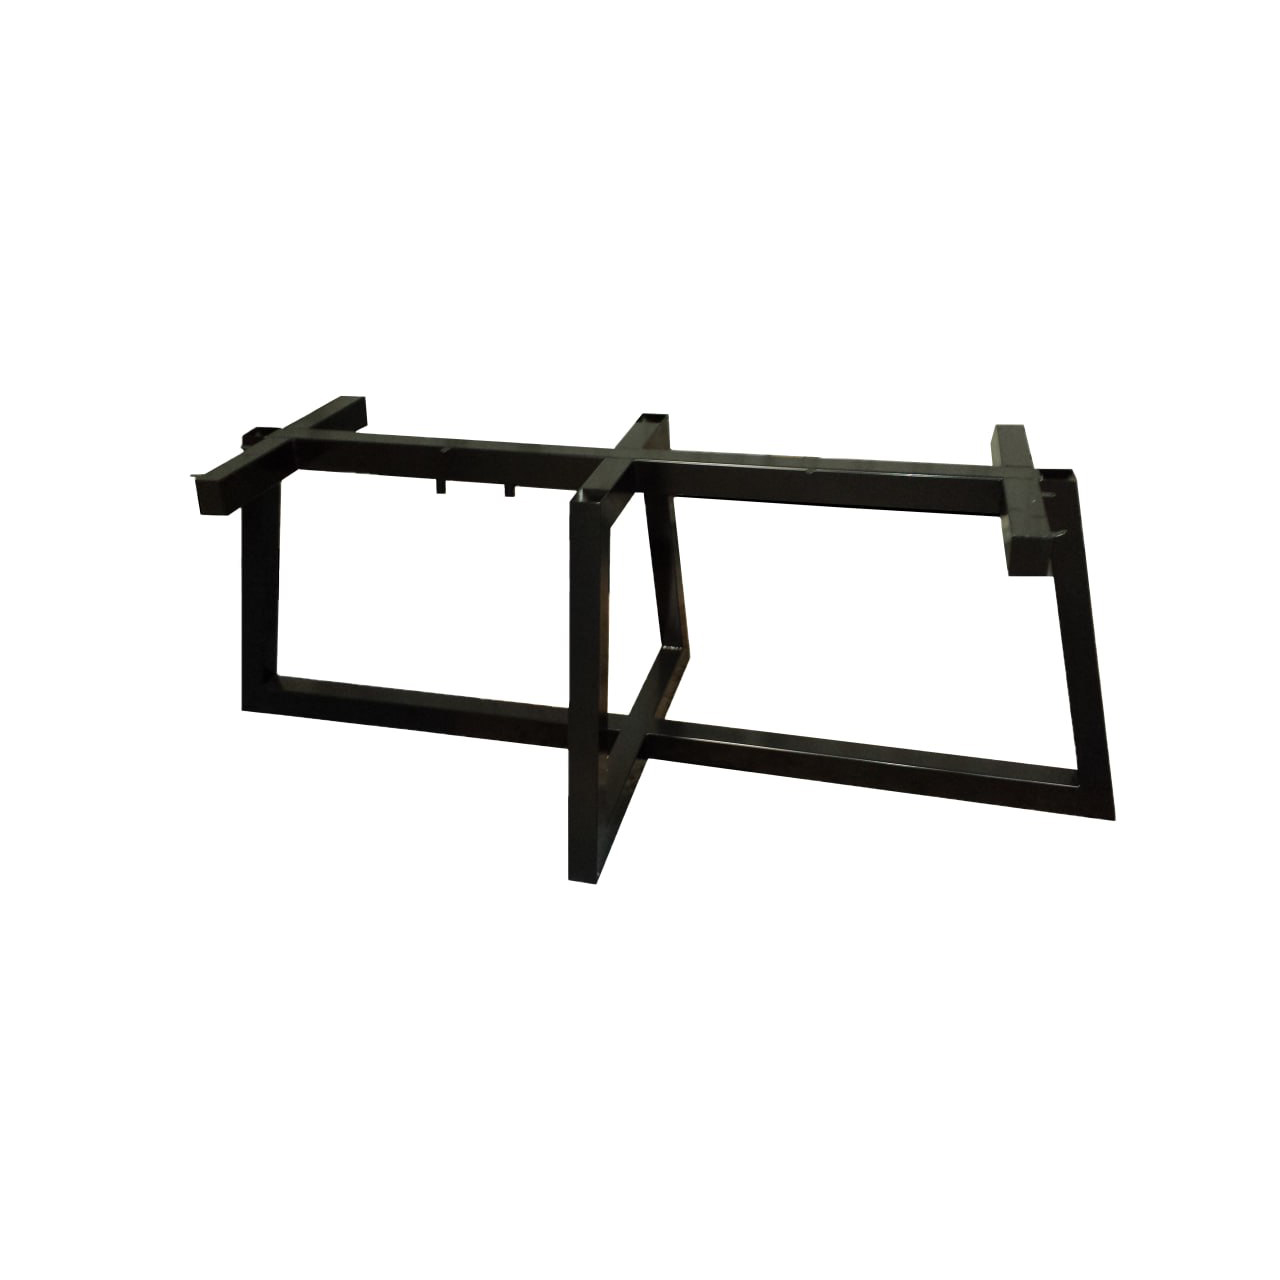 Contemporary Steel Table Frame Powder Coated Satin Black